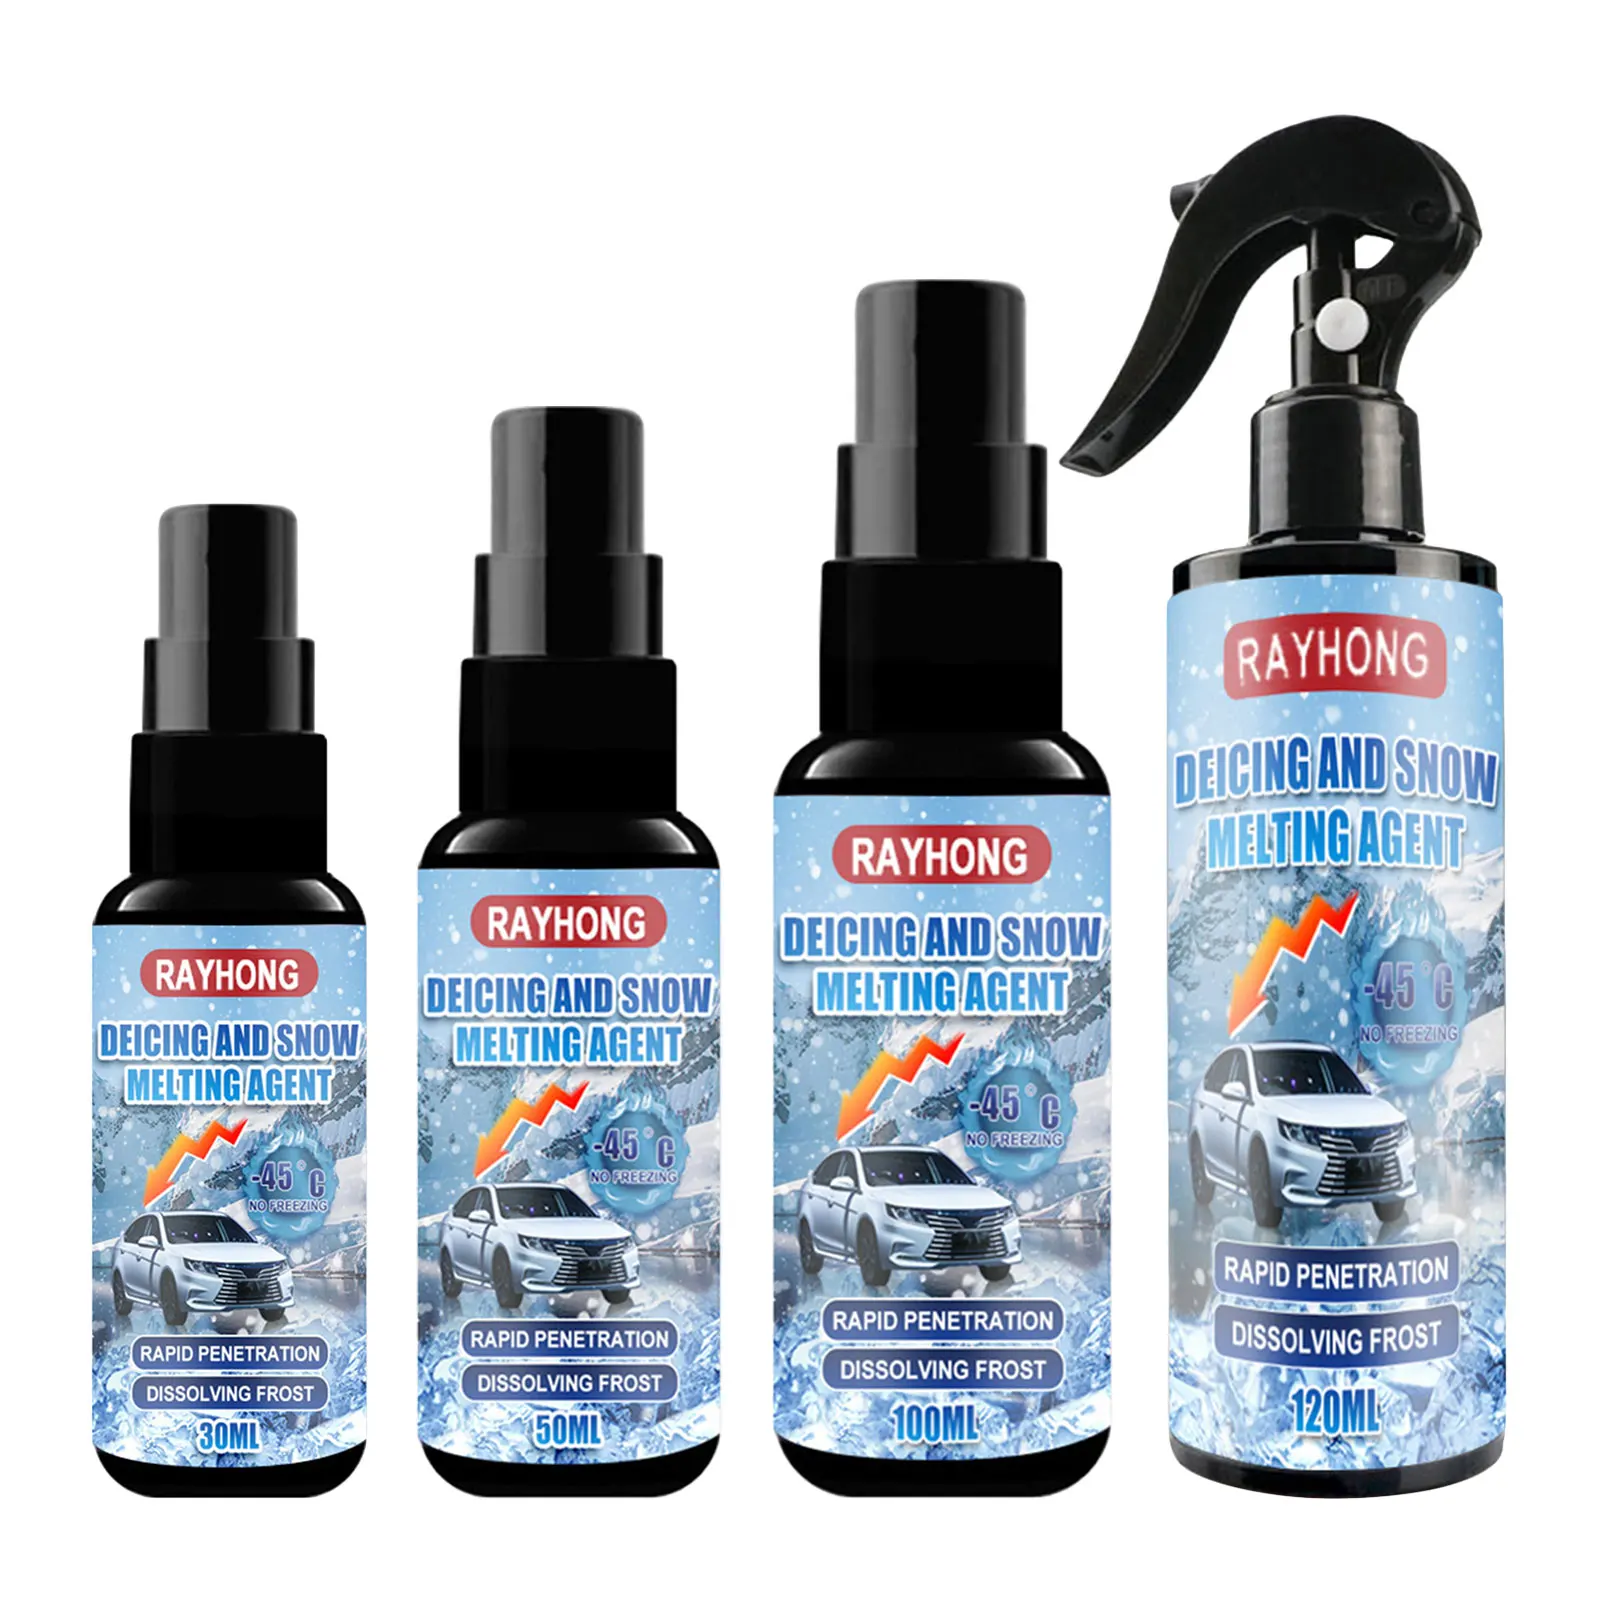 

Windshield Deicer Spray De-icer Car Windshield Deicer Snow Melting Agent Quickly And Easily Melts Multifunctional Automotive